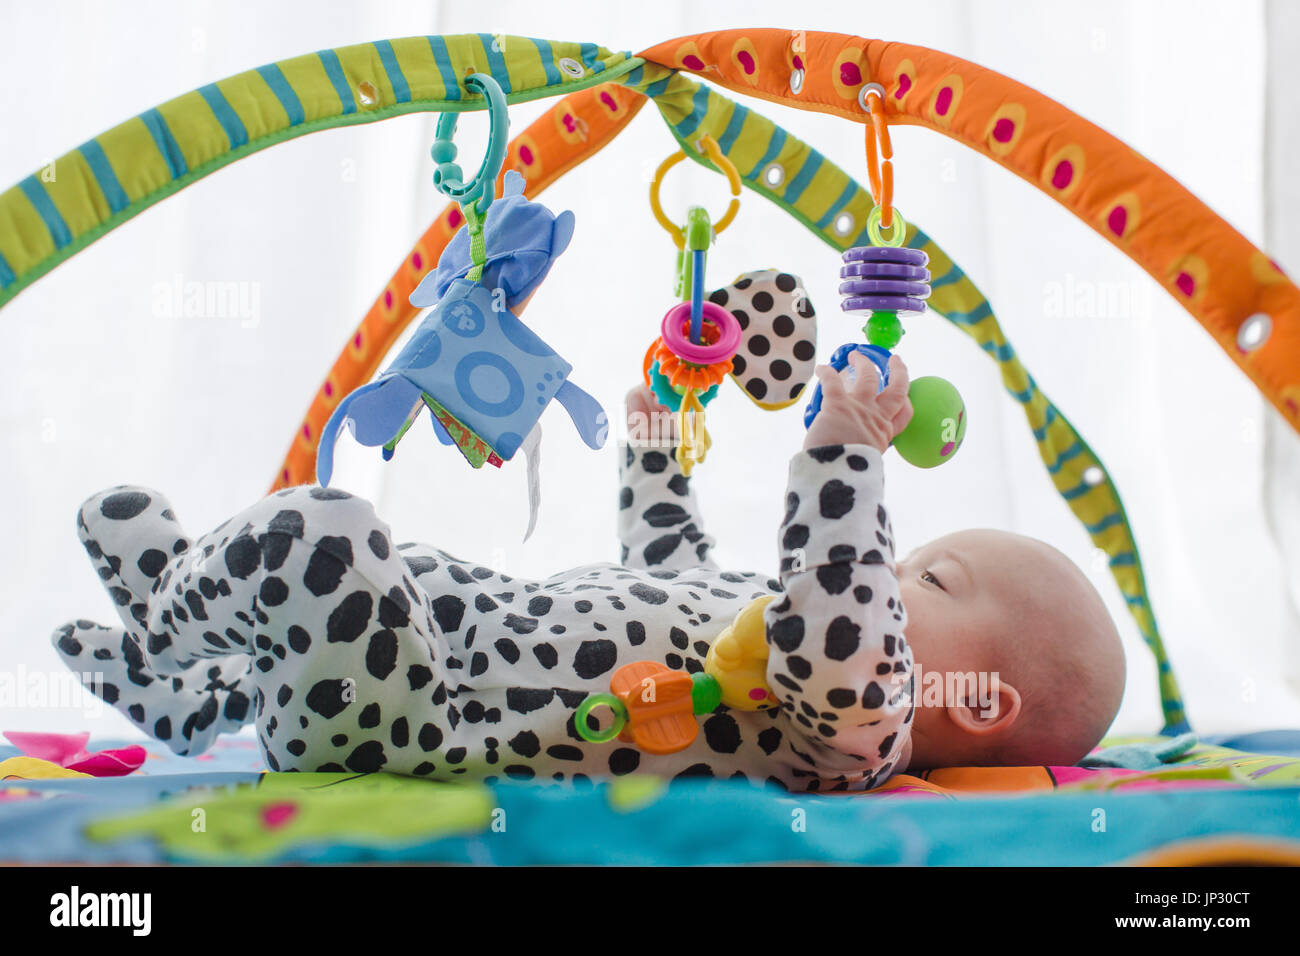 Happy baby boy smiling on playmat Stock Photo